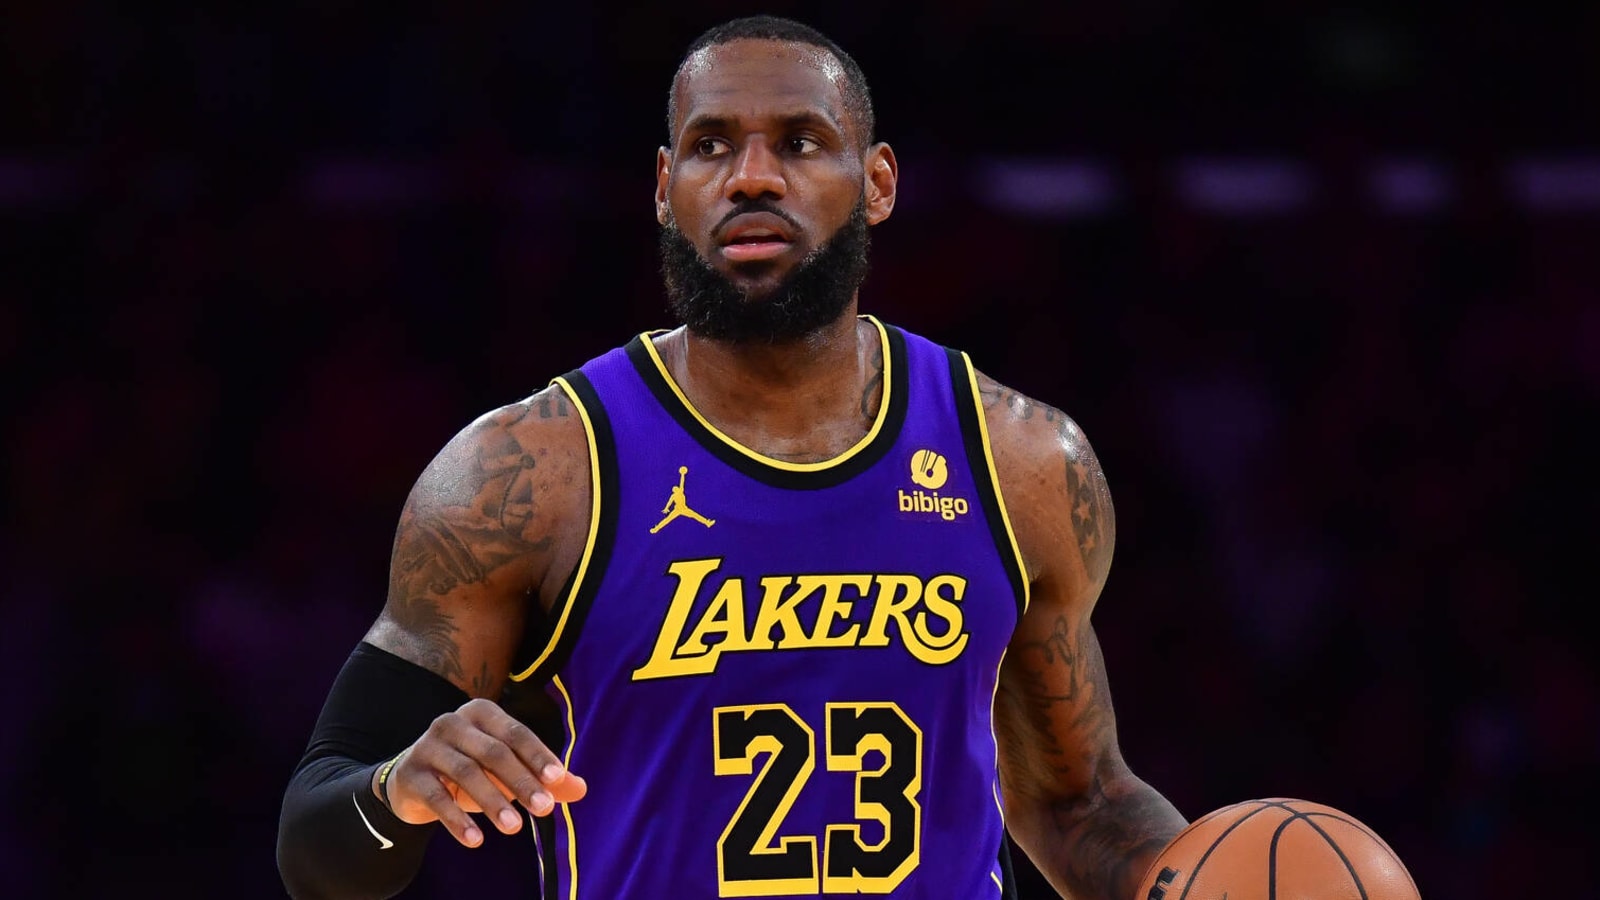 LeBron reacts to question about Lakers' trade-deadline moves